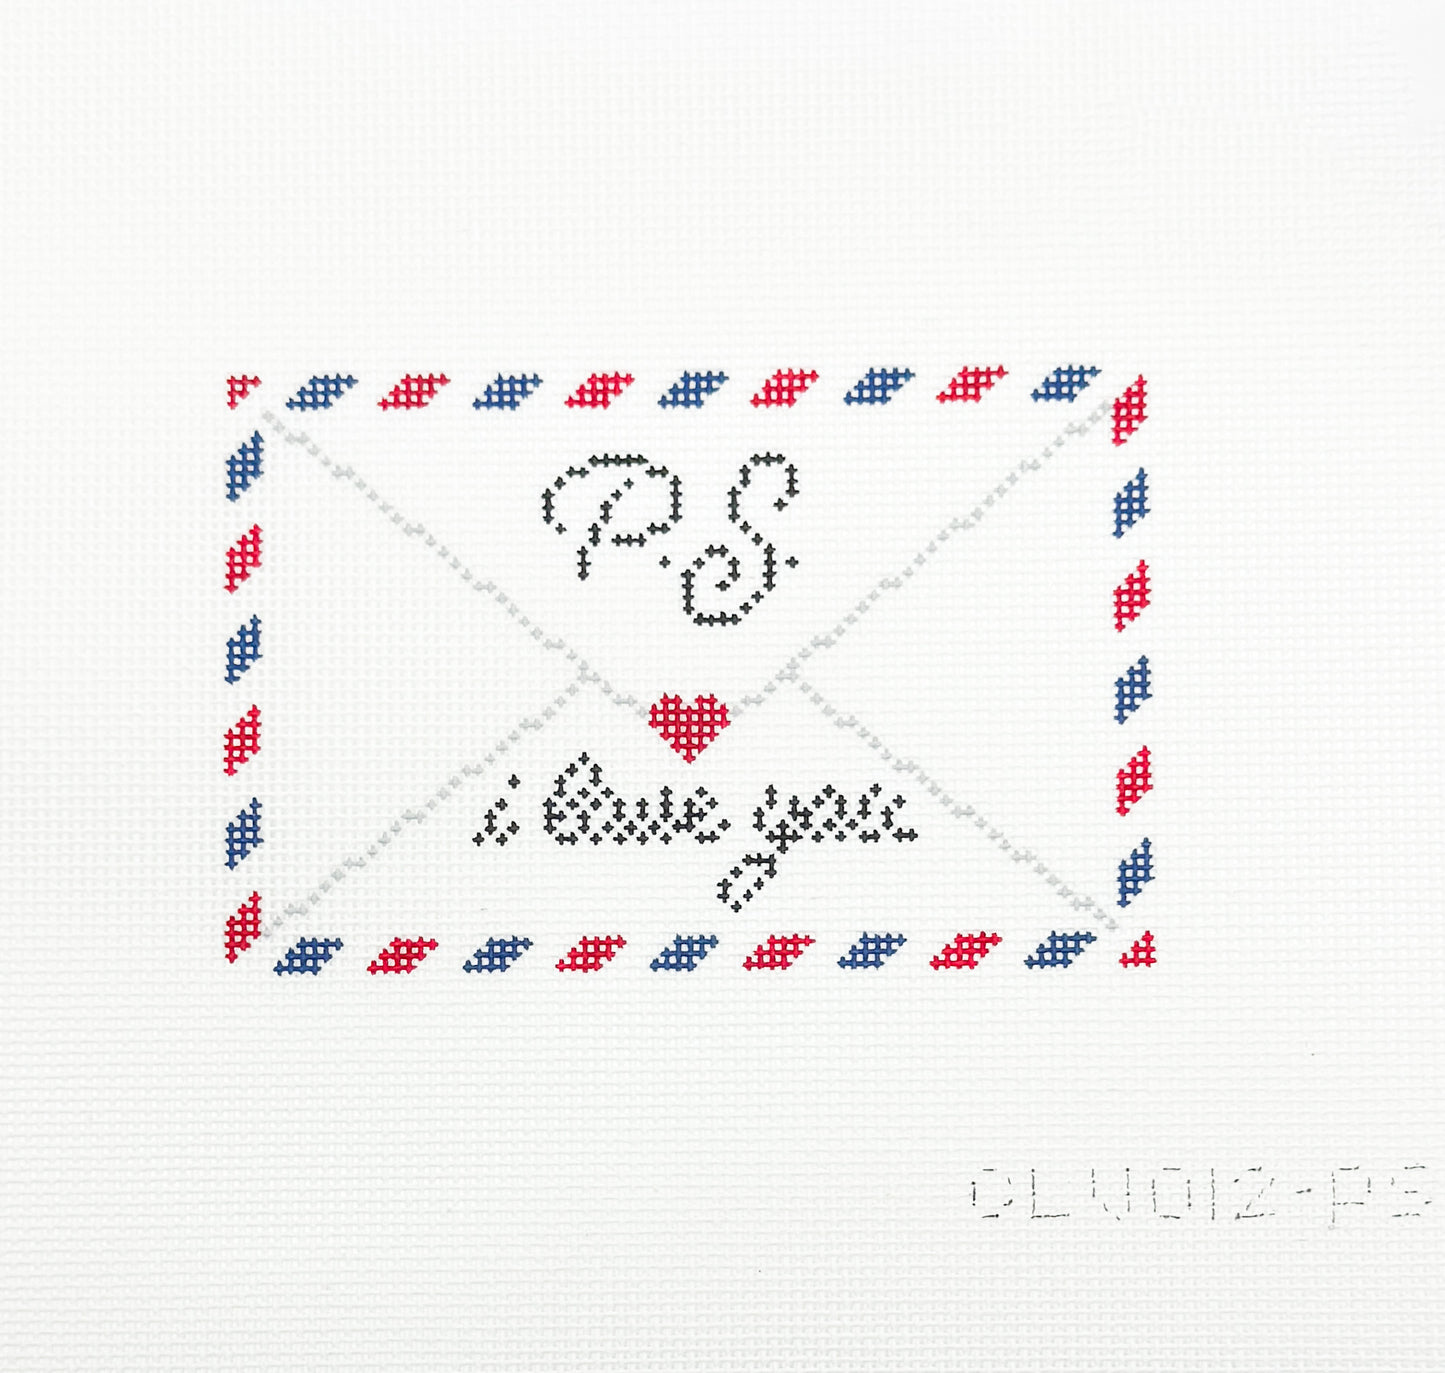 PS I Love You letter